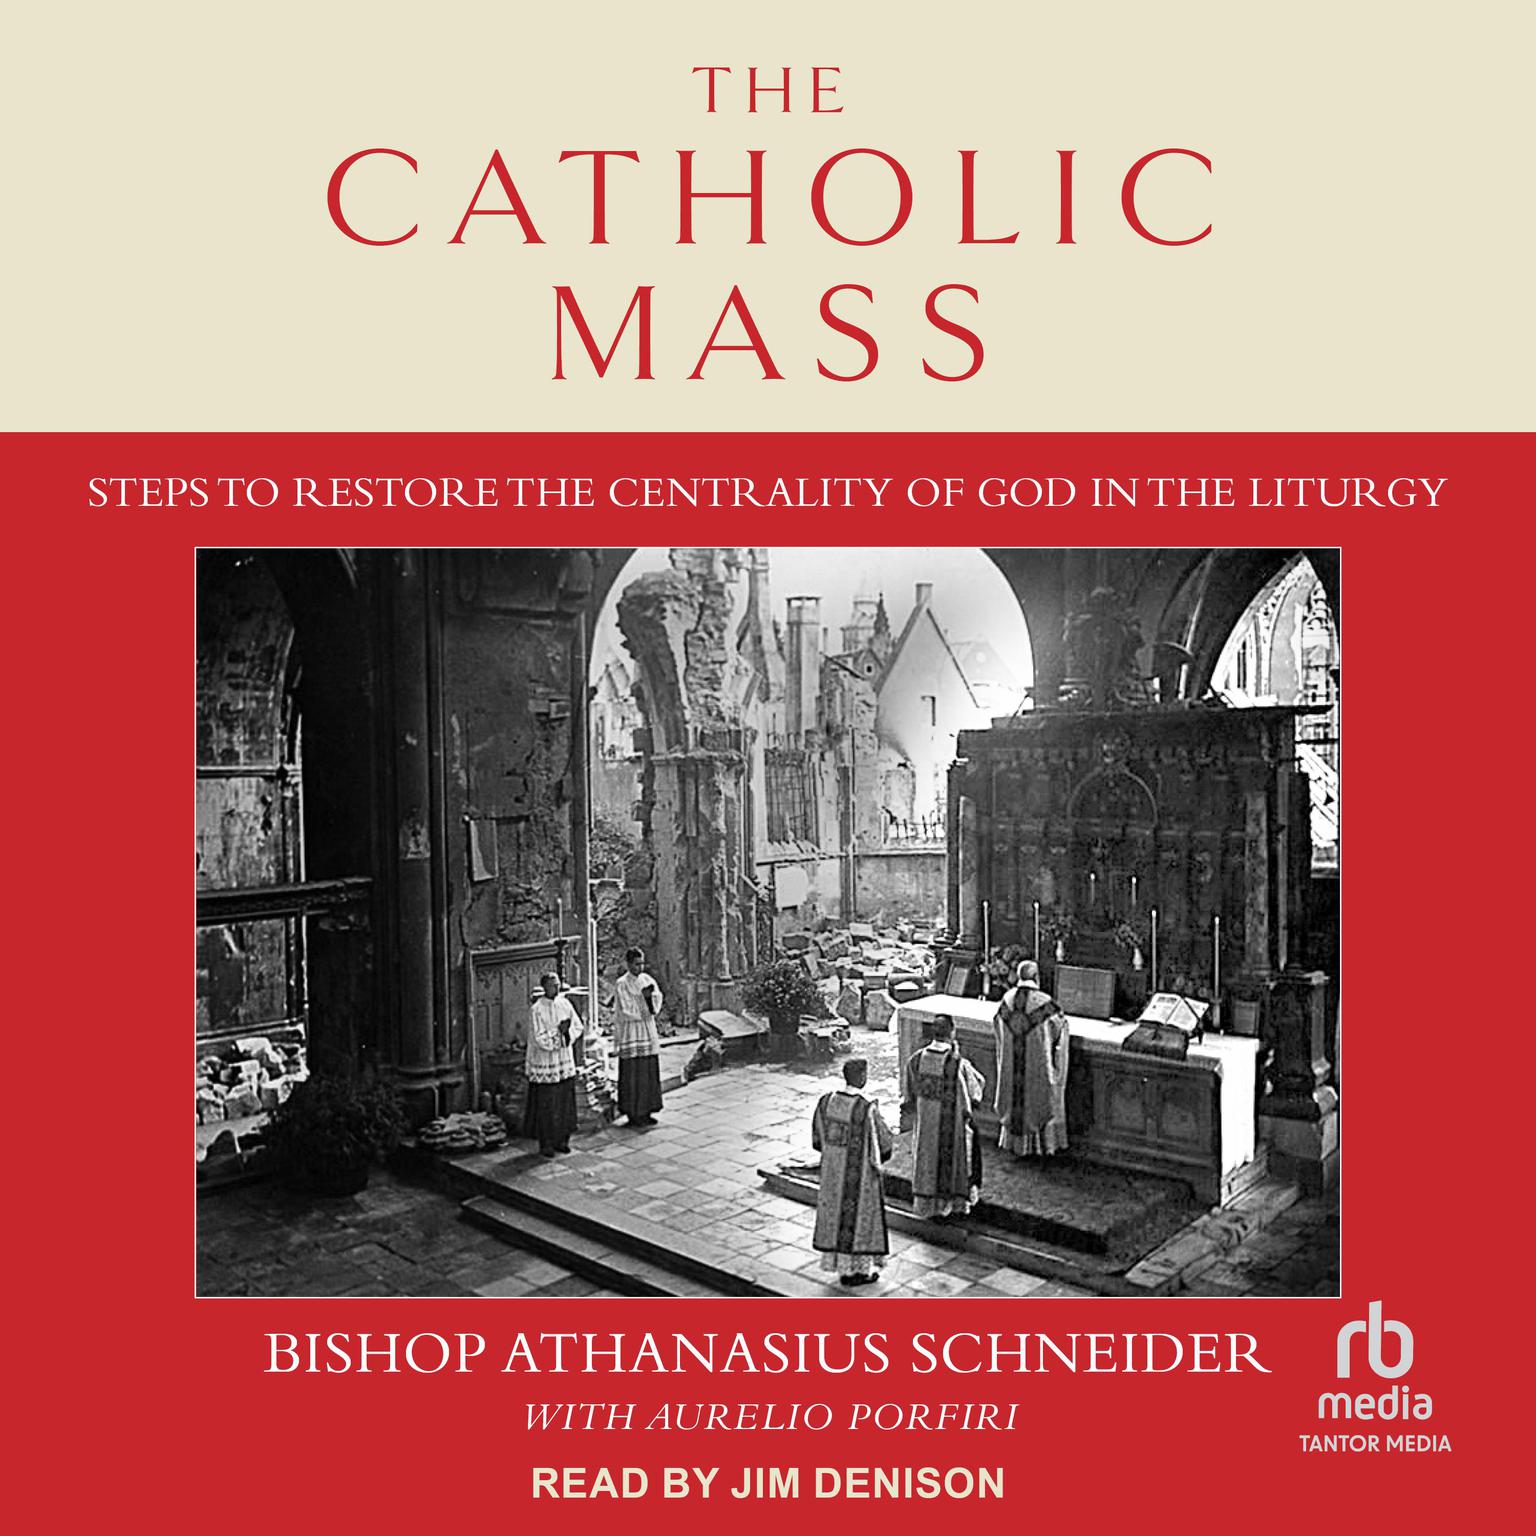 The Catholic Mass: Steps to Restore the Centrality of God in the Liturgy Audiobook, by Bishop Athanasius Schneider